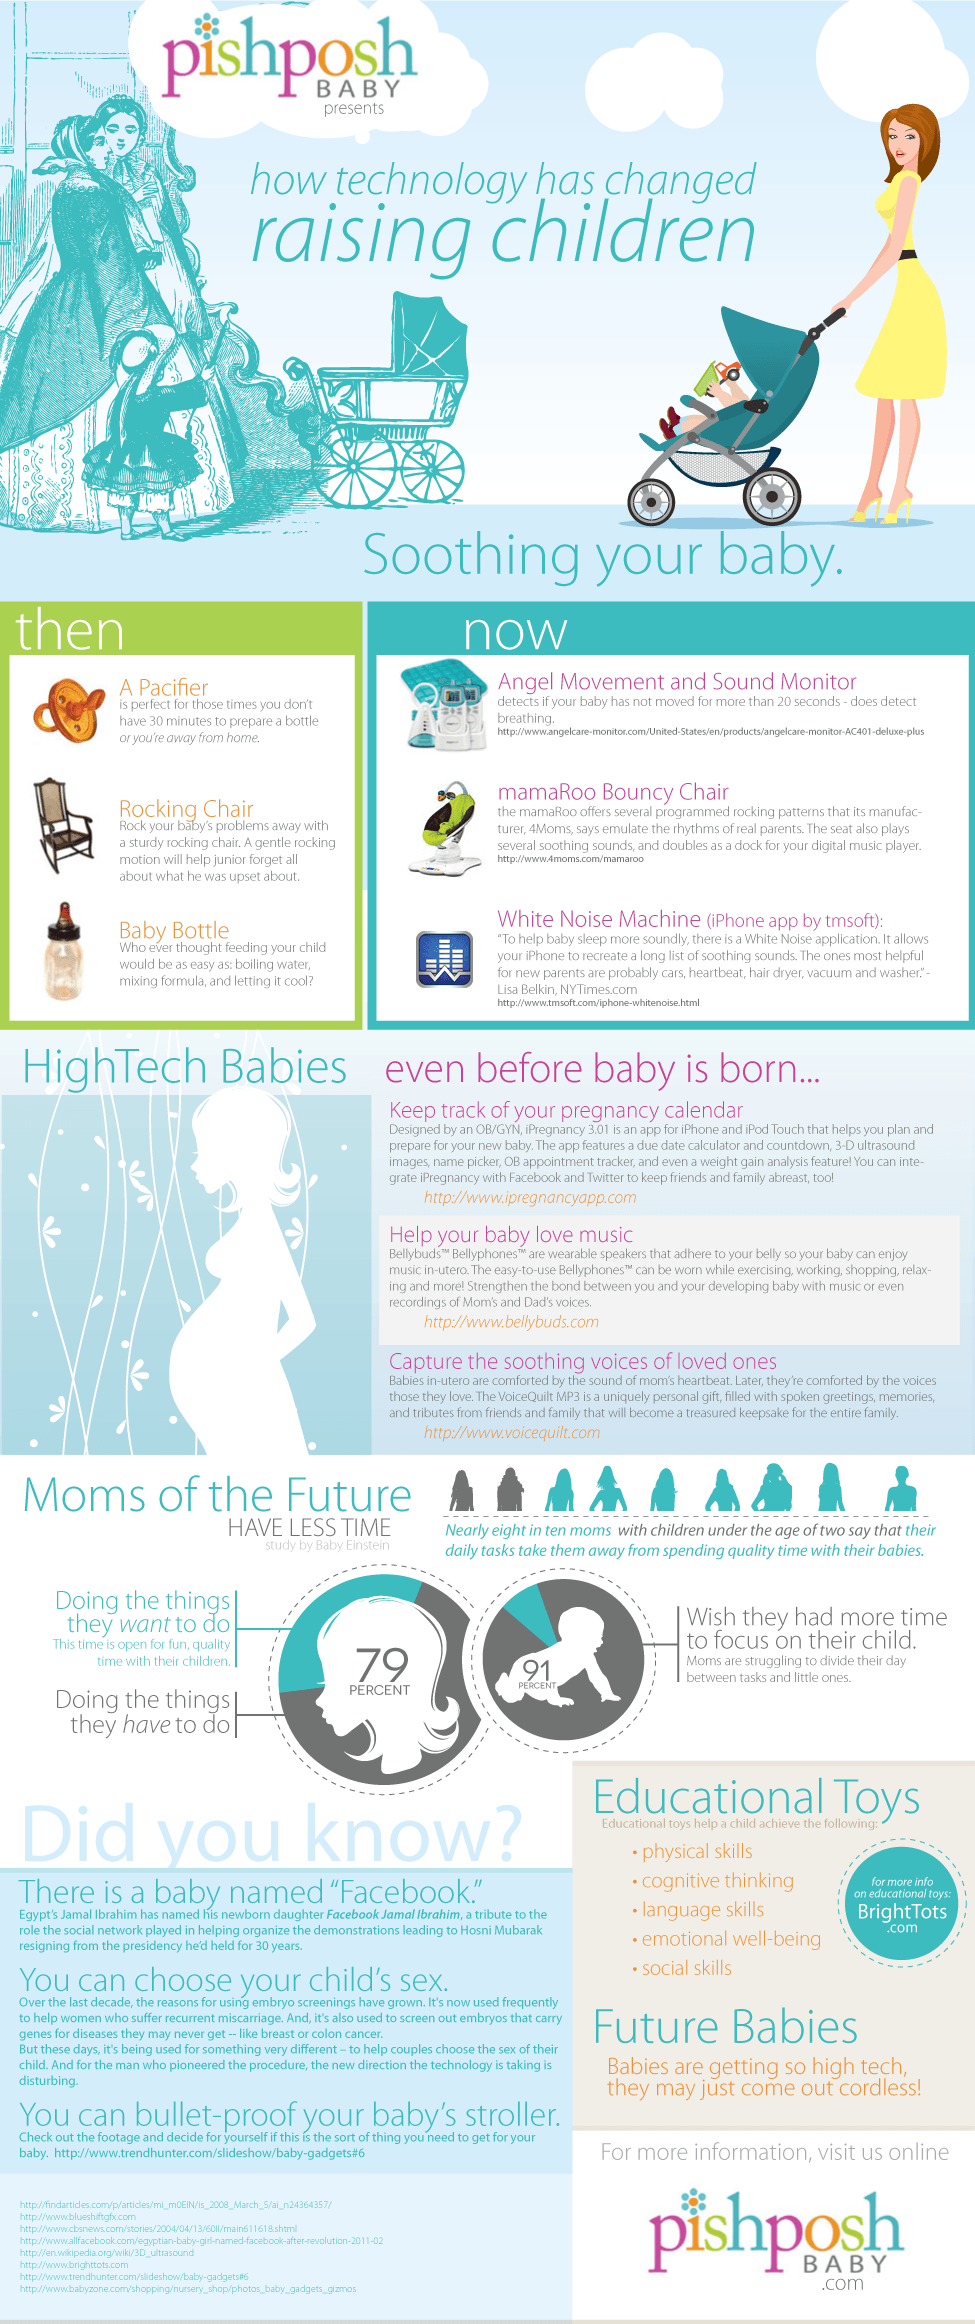 This Week In Infographics: Stupid Smart Phones And Bullet-Proof Baby Strollers